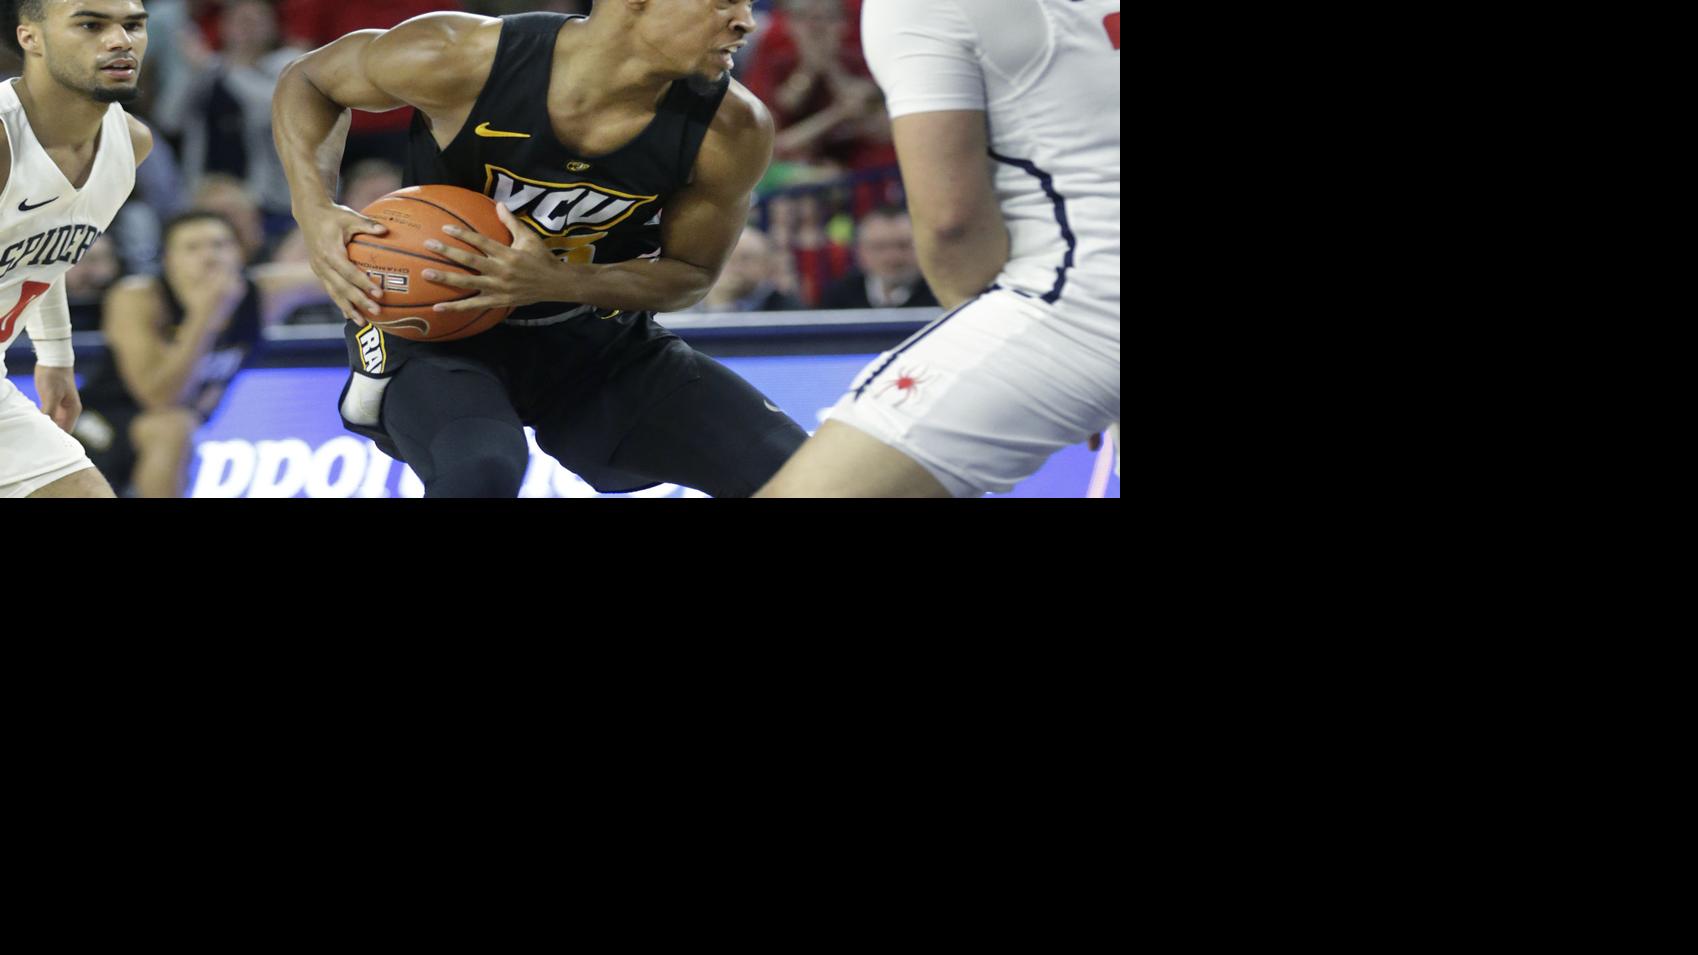 vcu-basketball-mailbag-who-could-be-vcu-s-breakout-player-in-the-ncaa